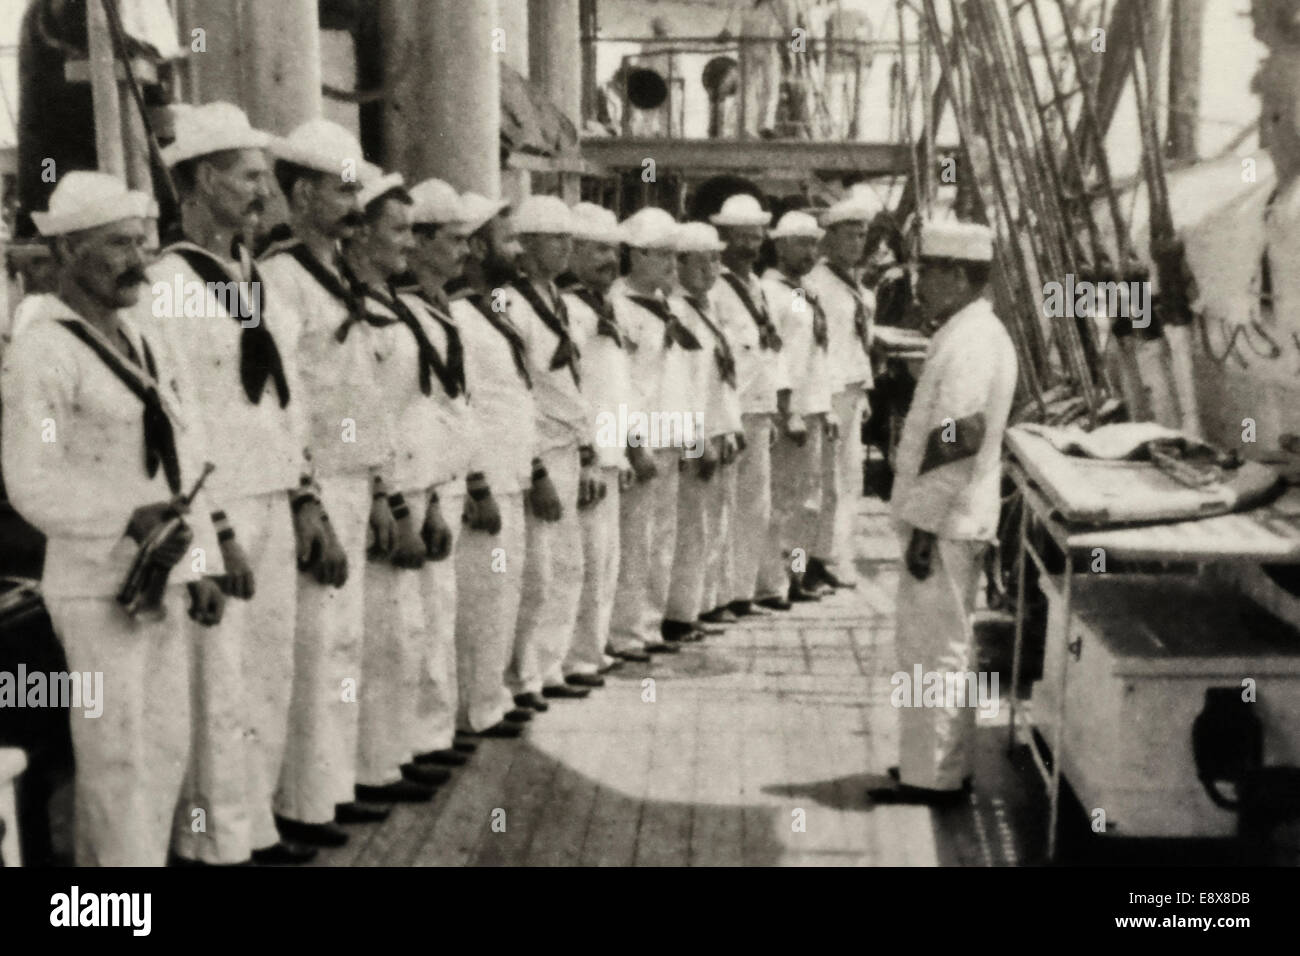 All eyes on the Chief, as sailors stand ready for inspection aboard an American Warship at the turn of the century, circa 1900 Stock Photo